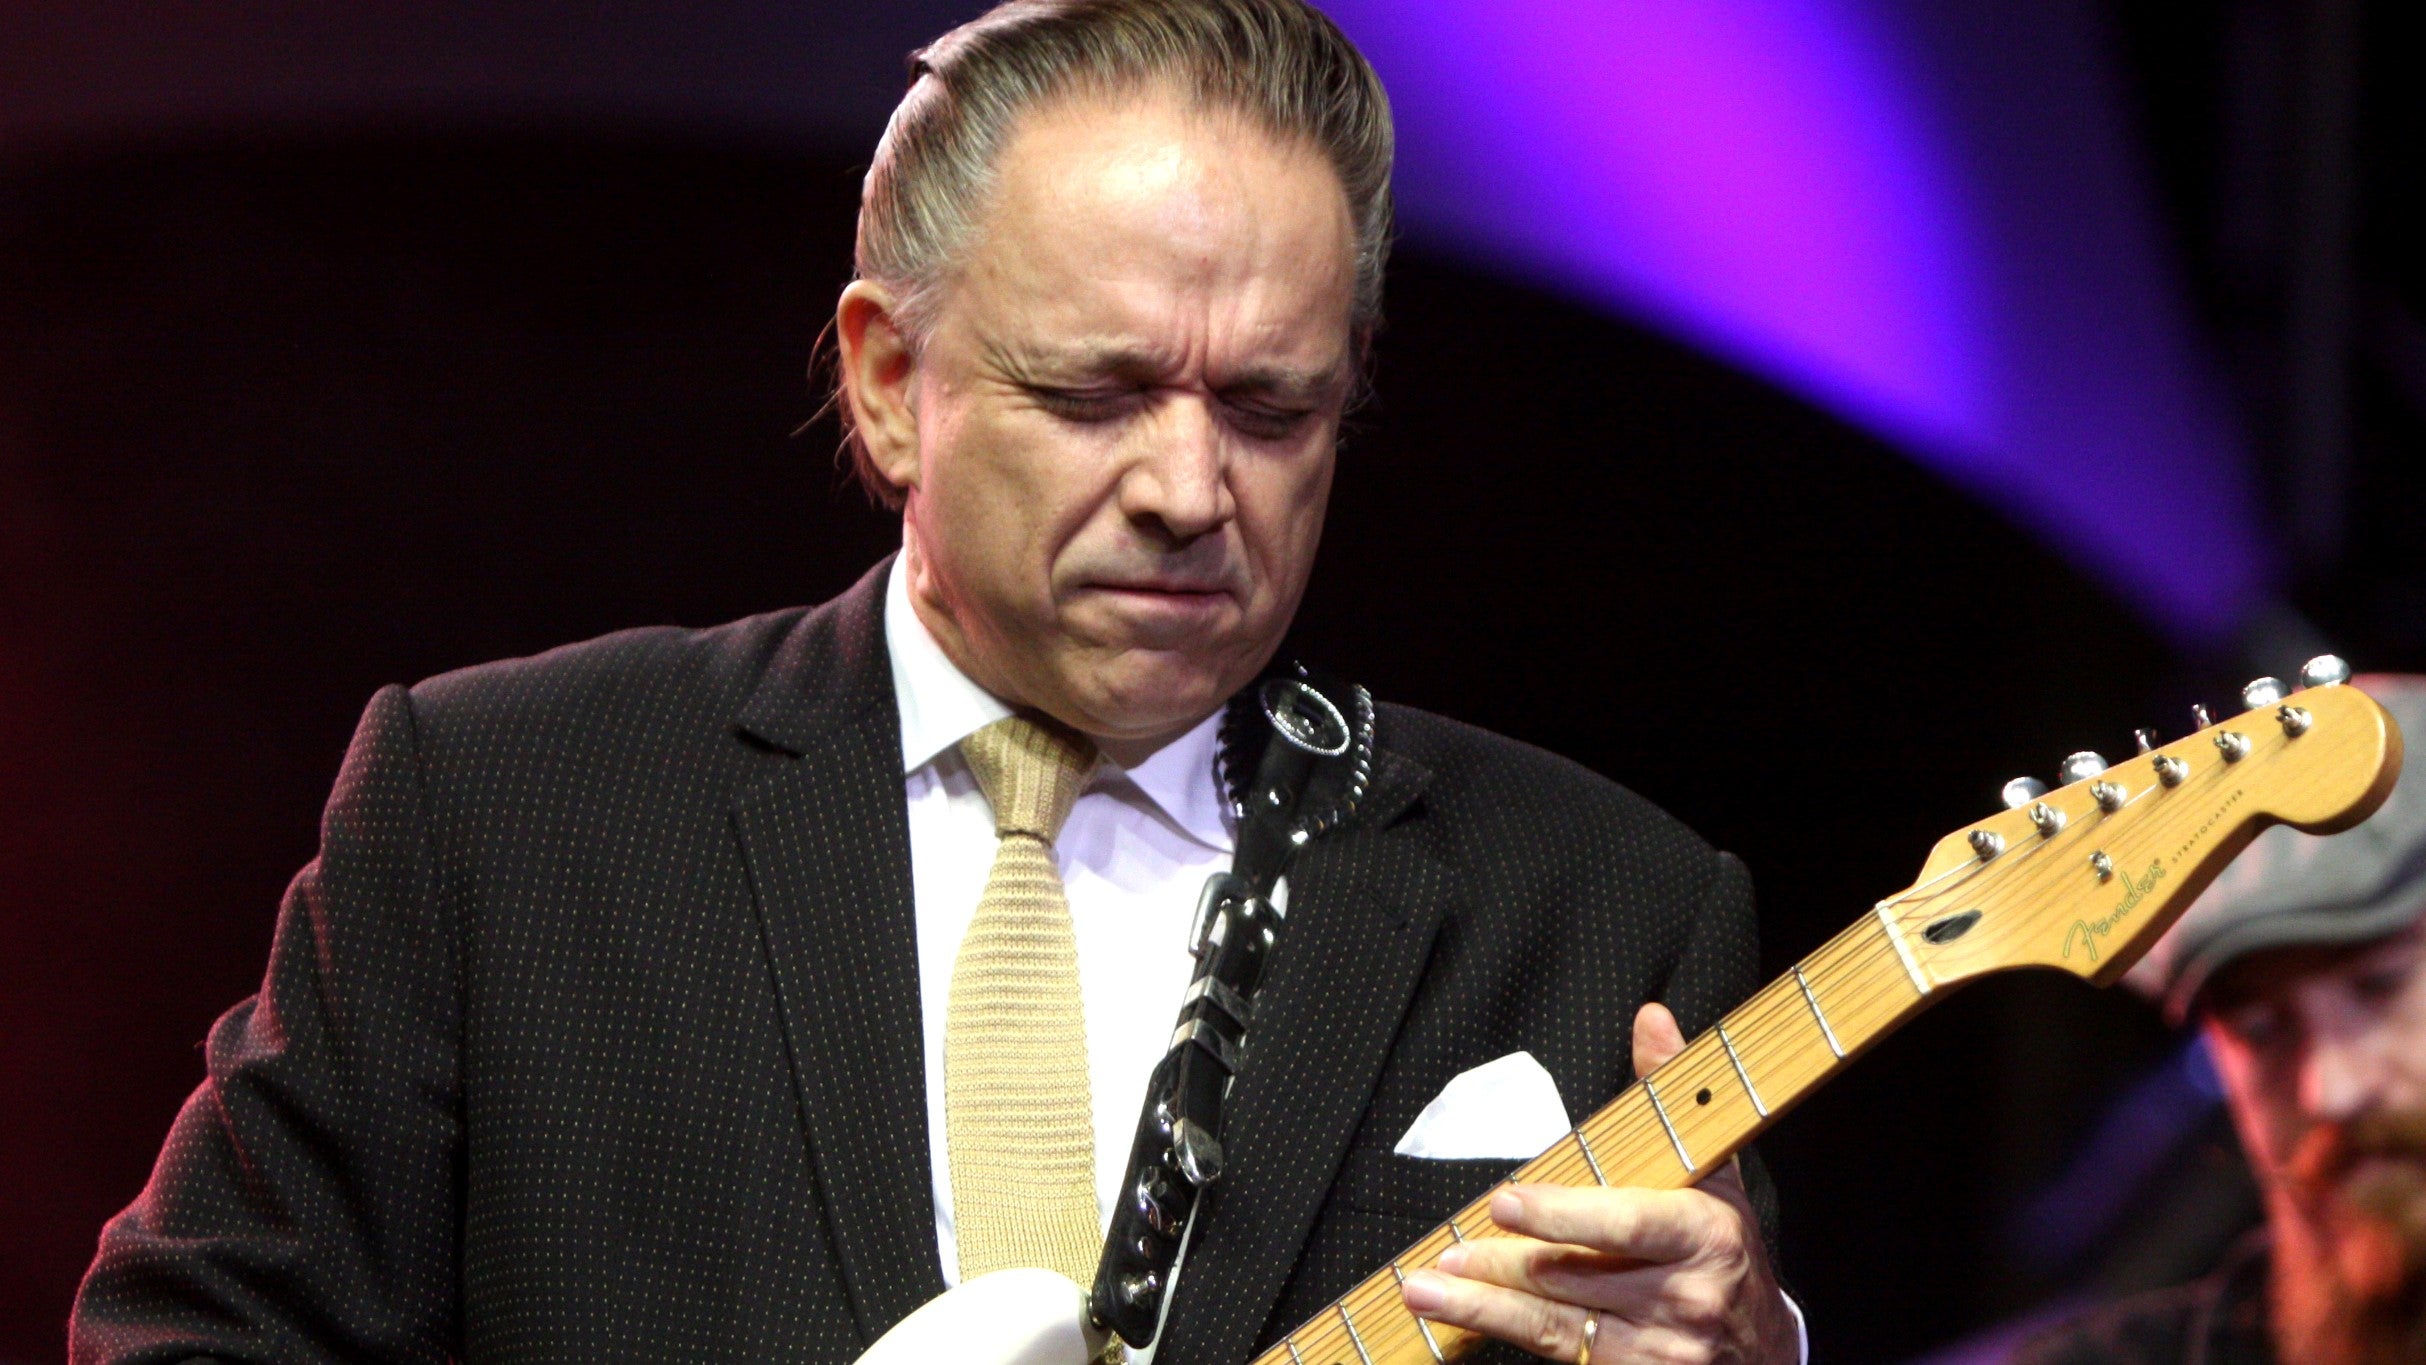 Jimmie Vaughan at Blue Gate Performing Arts Center